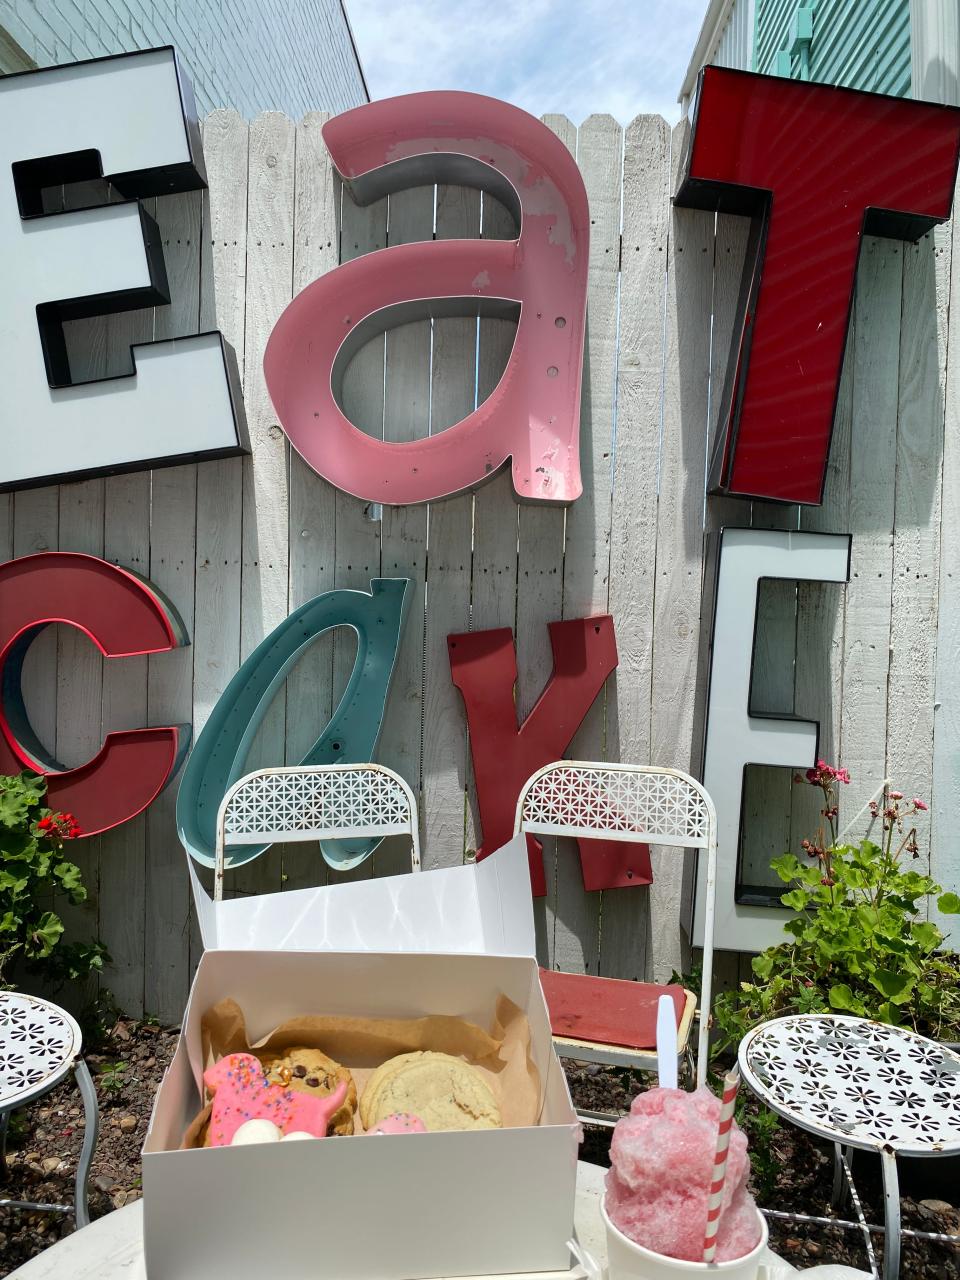 Katiebug's Sips & Sweets also offers cake slices, shaved ice, craft sodas and more to be taken to-go or enjoyed in their decorated yard space.